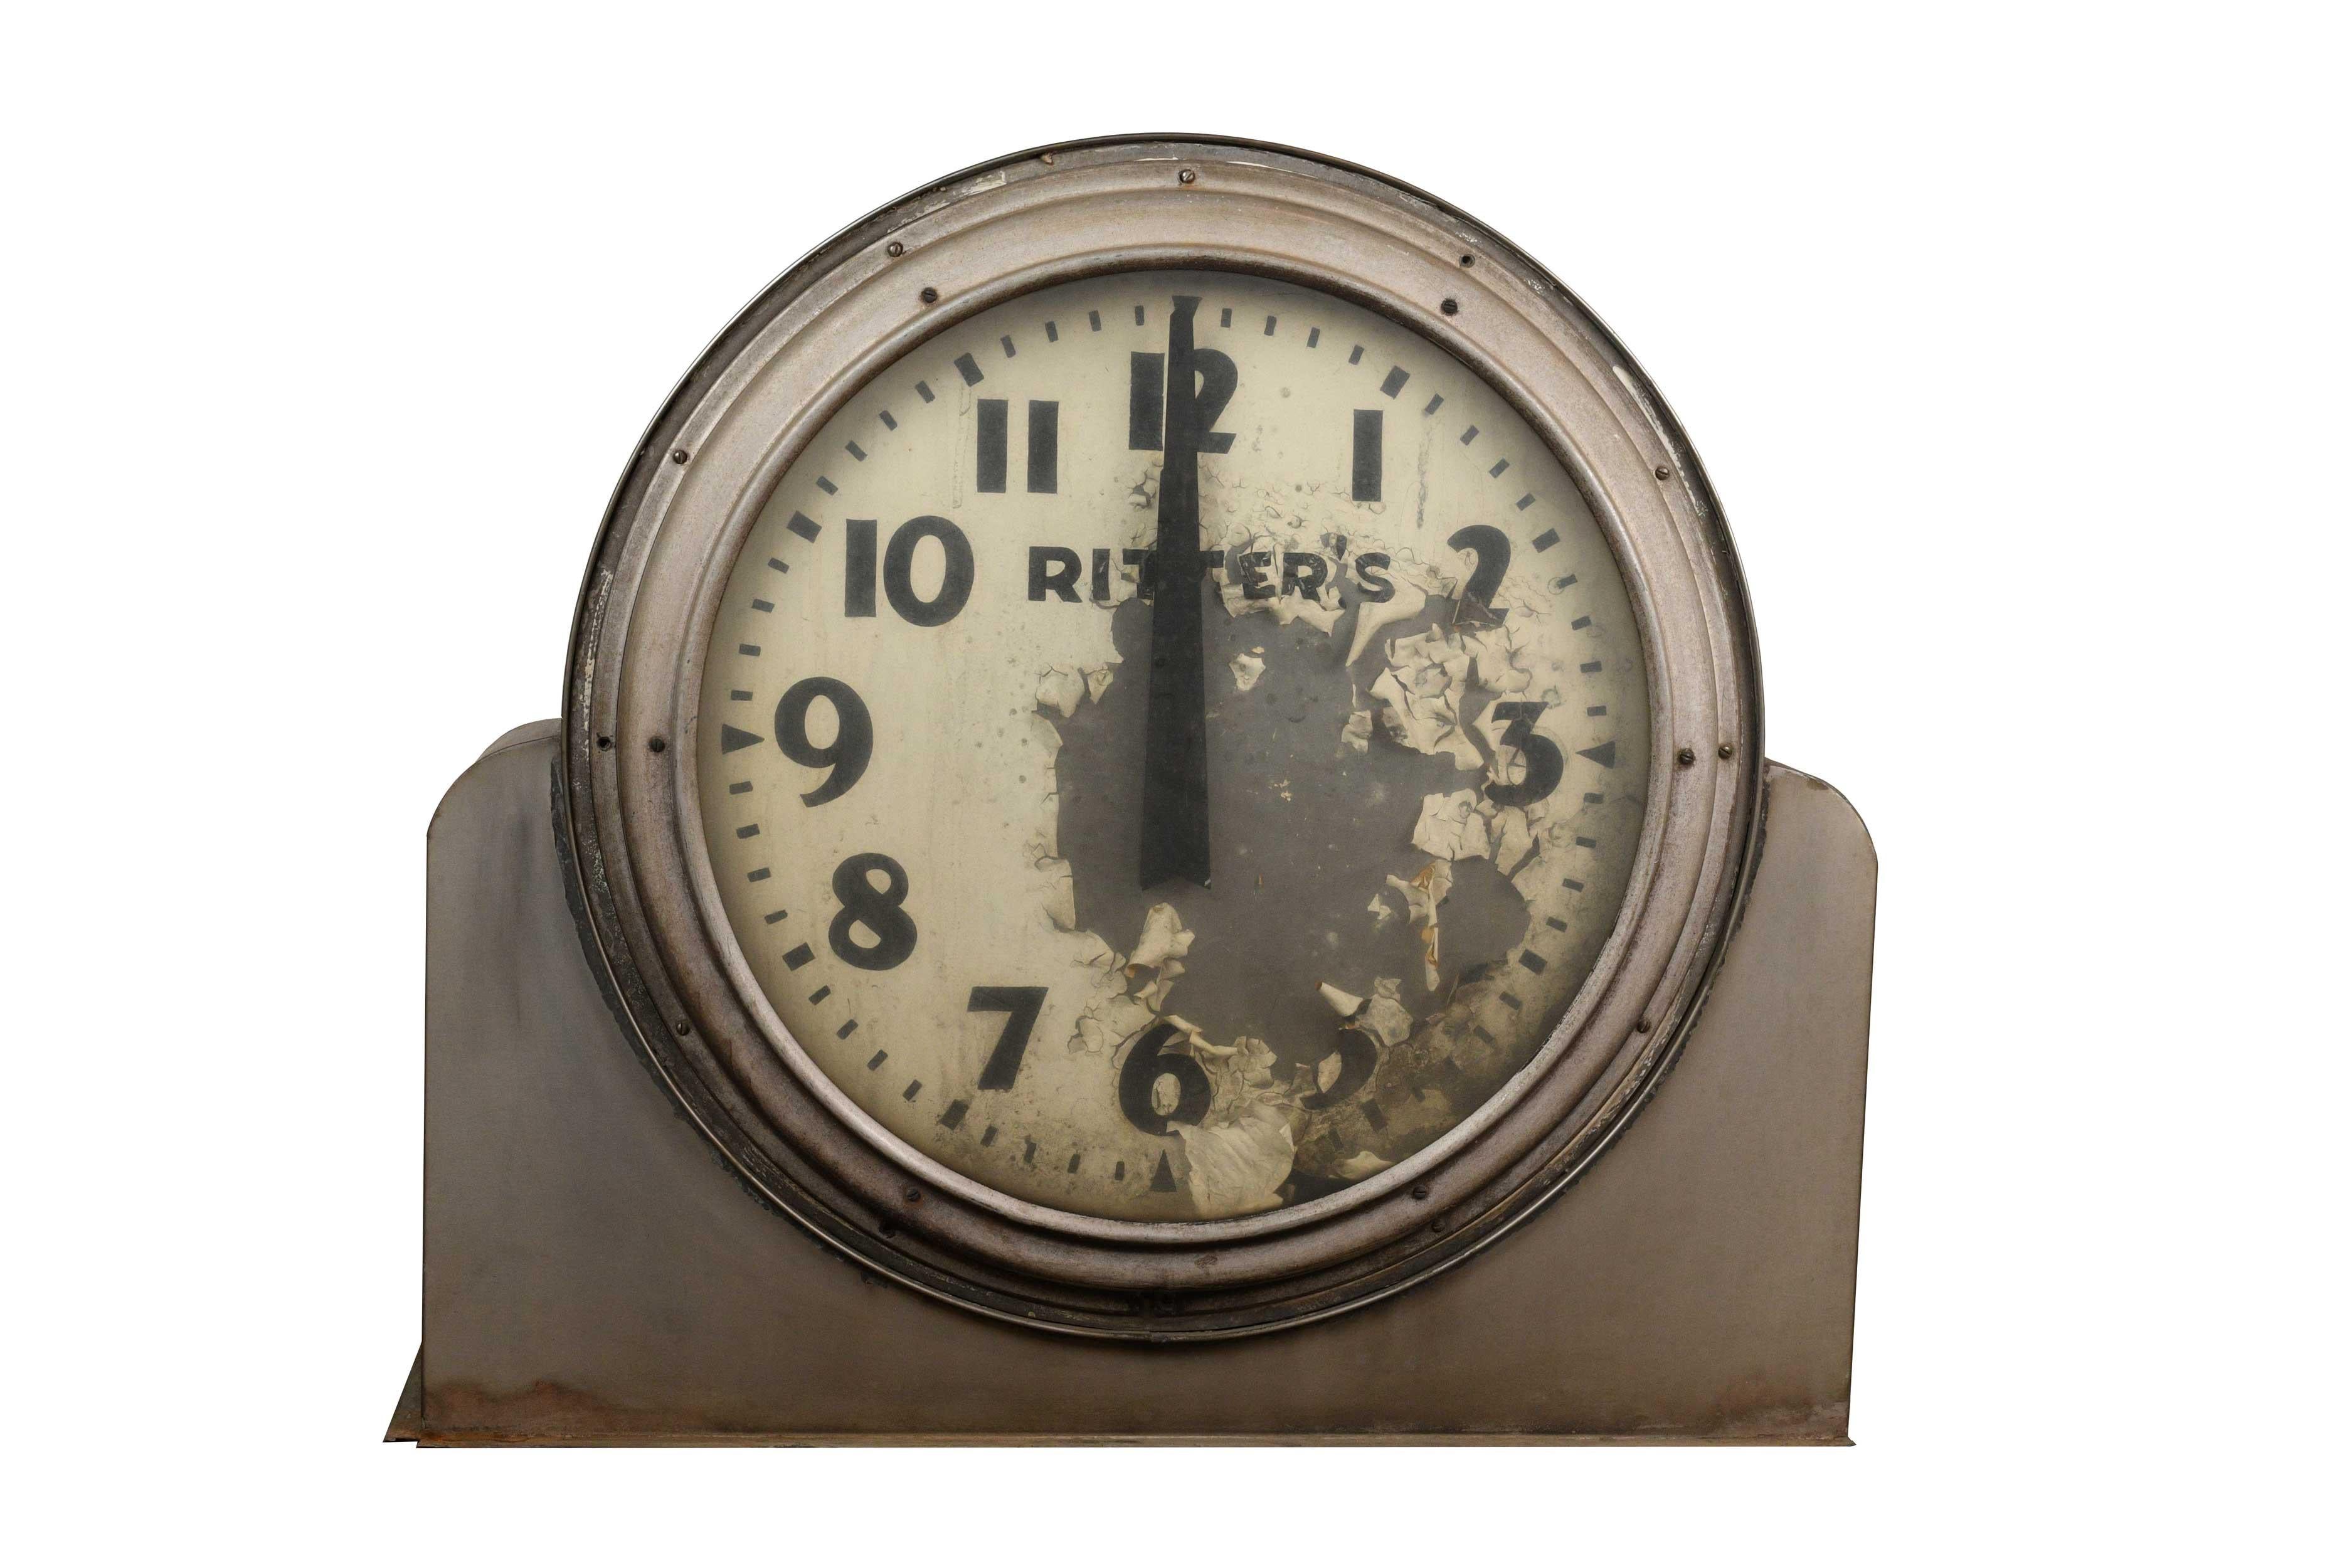 Large industrial analog clock with electrical wiring. Glass covers the face of the metal clock, which has original finish. Signs of wear and tear on the interior backing. Currently non-functioning, 

circa 1950
Condition: Fair
Finish: